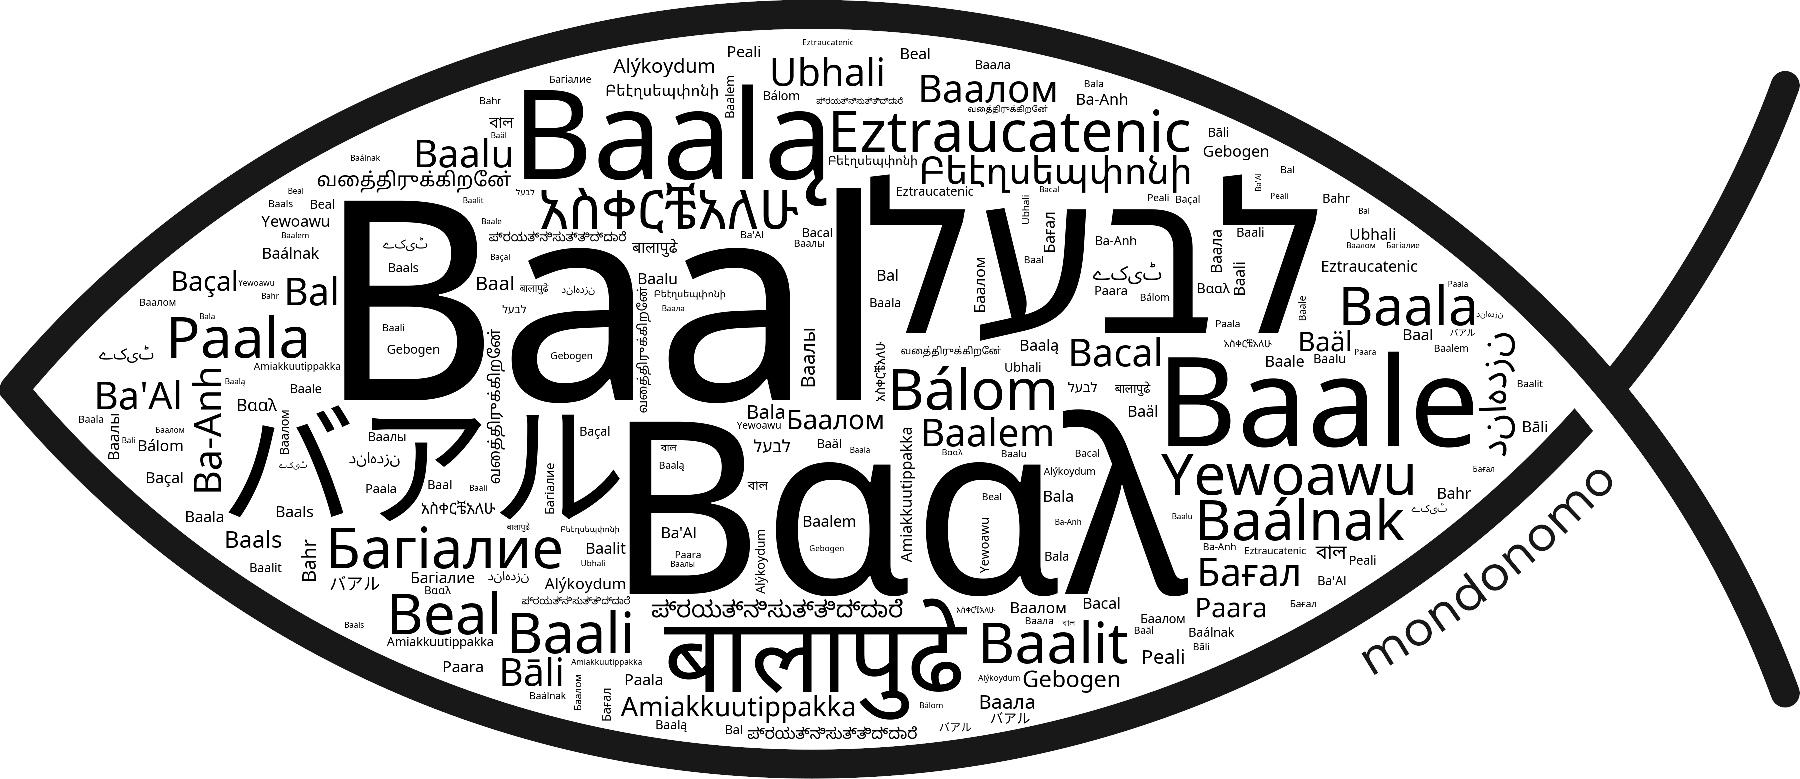 Name Baal in the world's Bibles